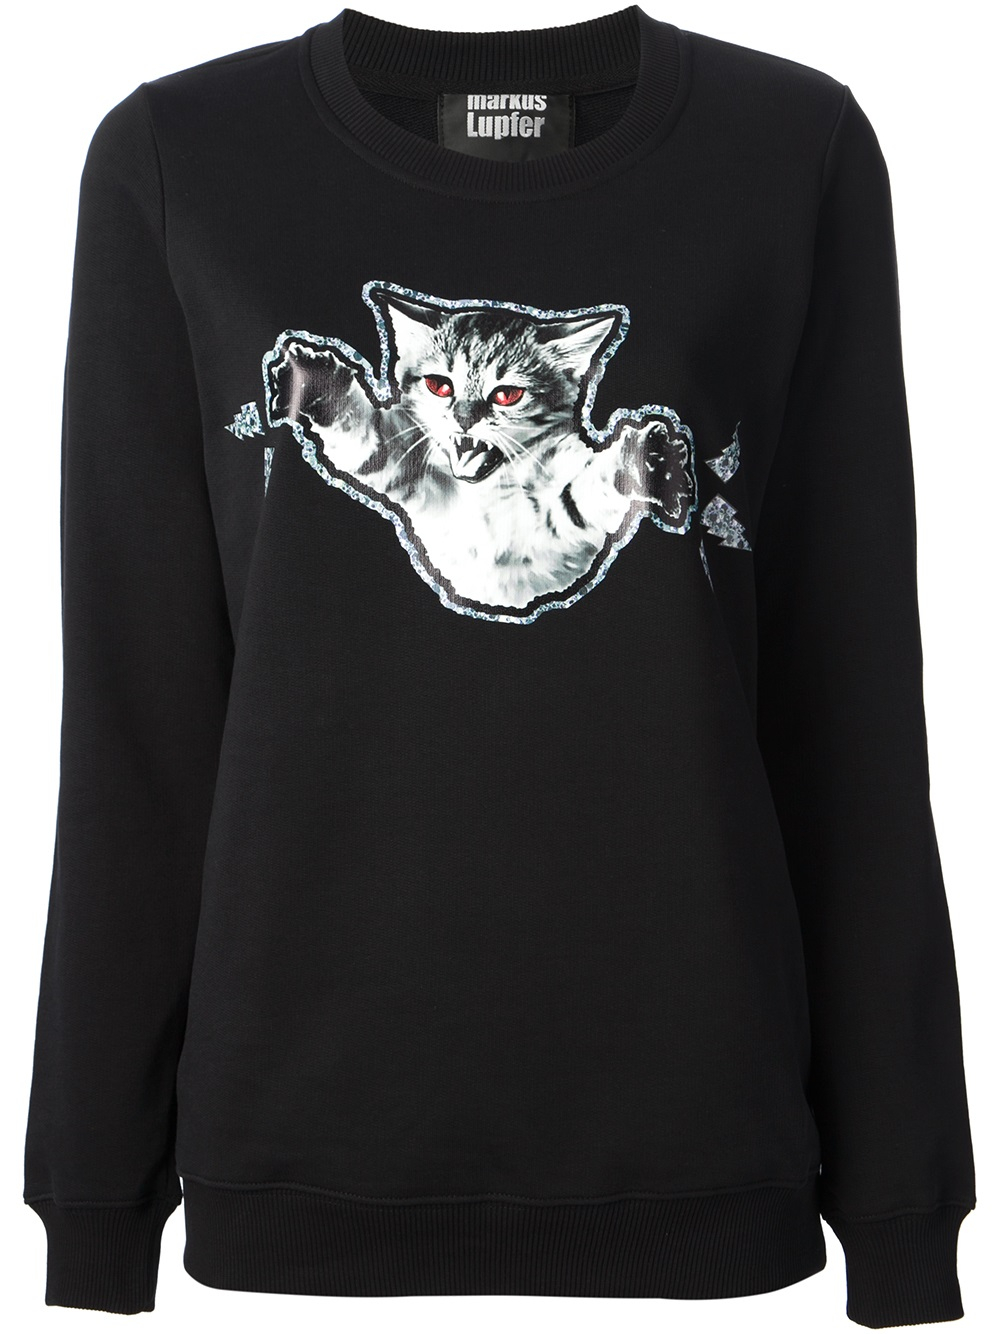 Markus lupfer Claws Out Sweatshirt in Black | Lyst